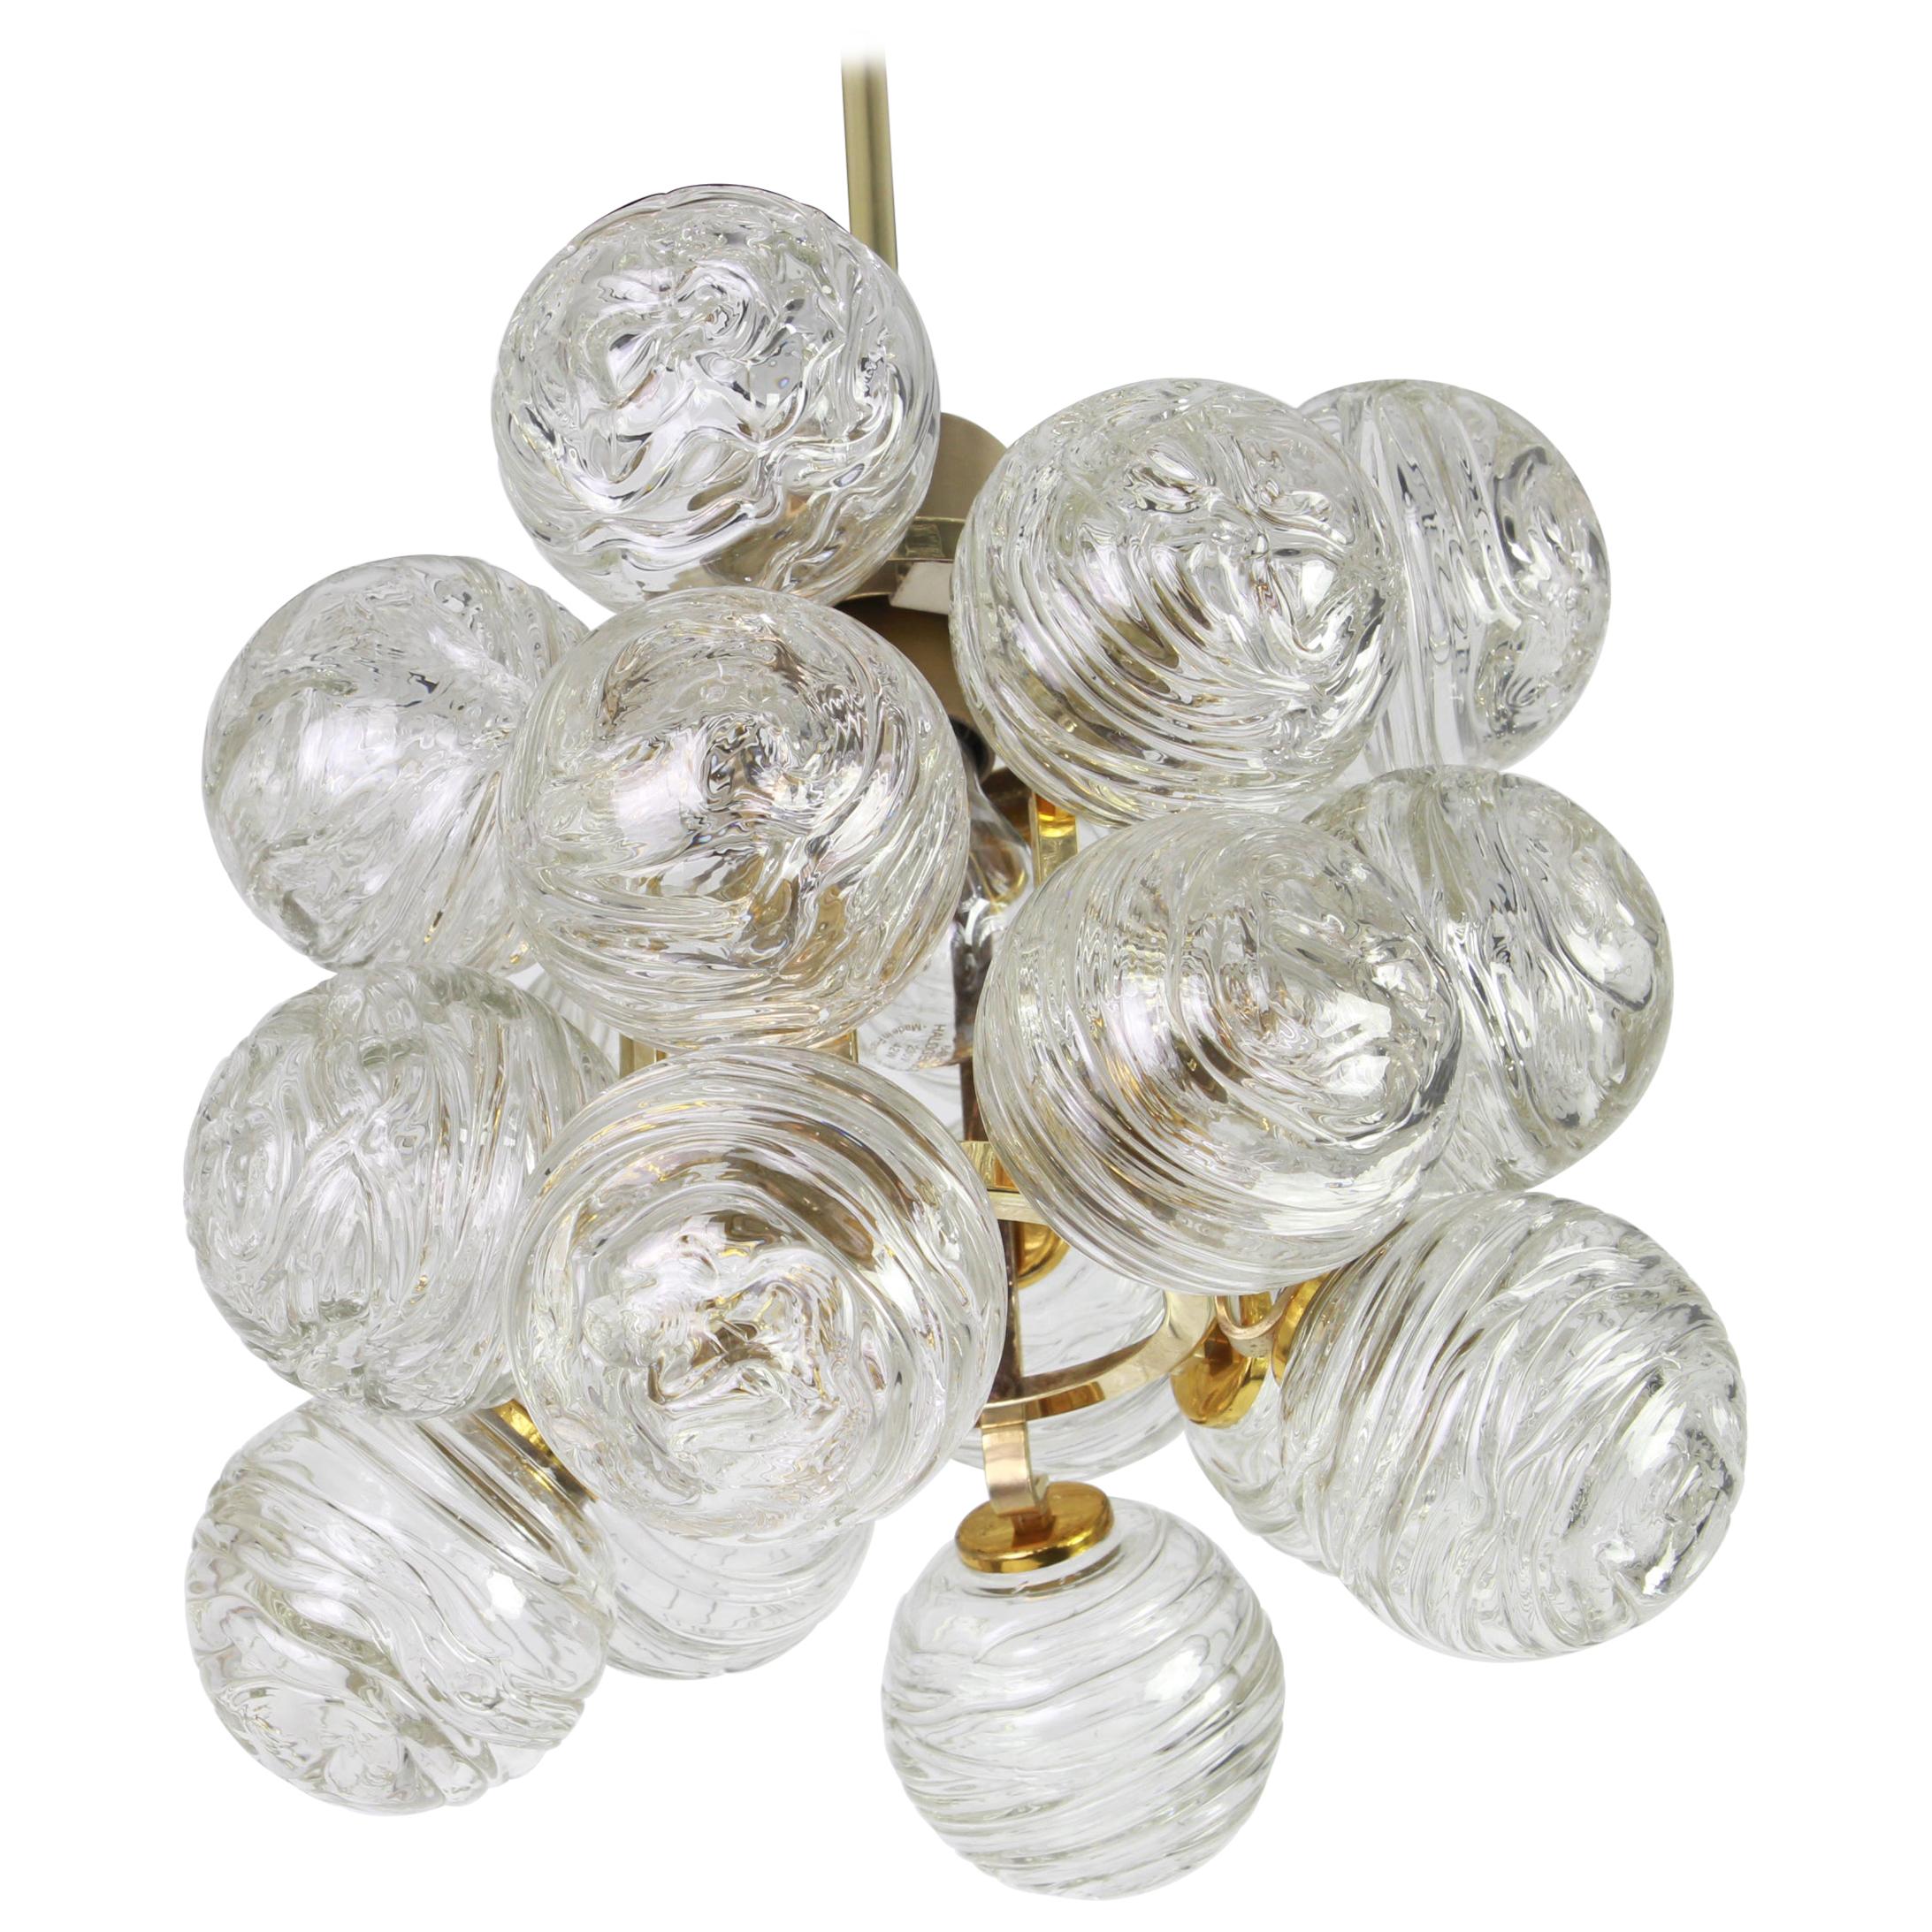 1 of 3 petite midcentury pendants made by Doria Leuchtern, manufactured in Germany, circa 1970-1979.
Each pendant is composed of many Murano glass swirl textured glass elements (snowballs) attached to a brass frame.

Sockets: 1 x E27 standard